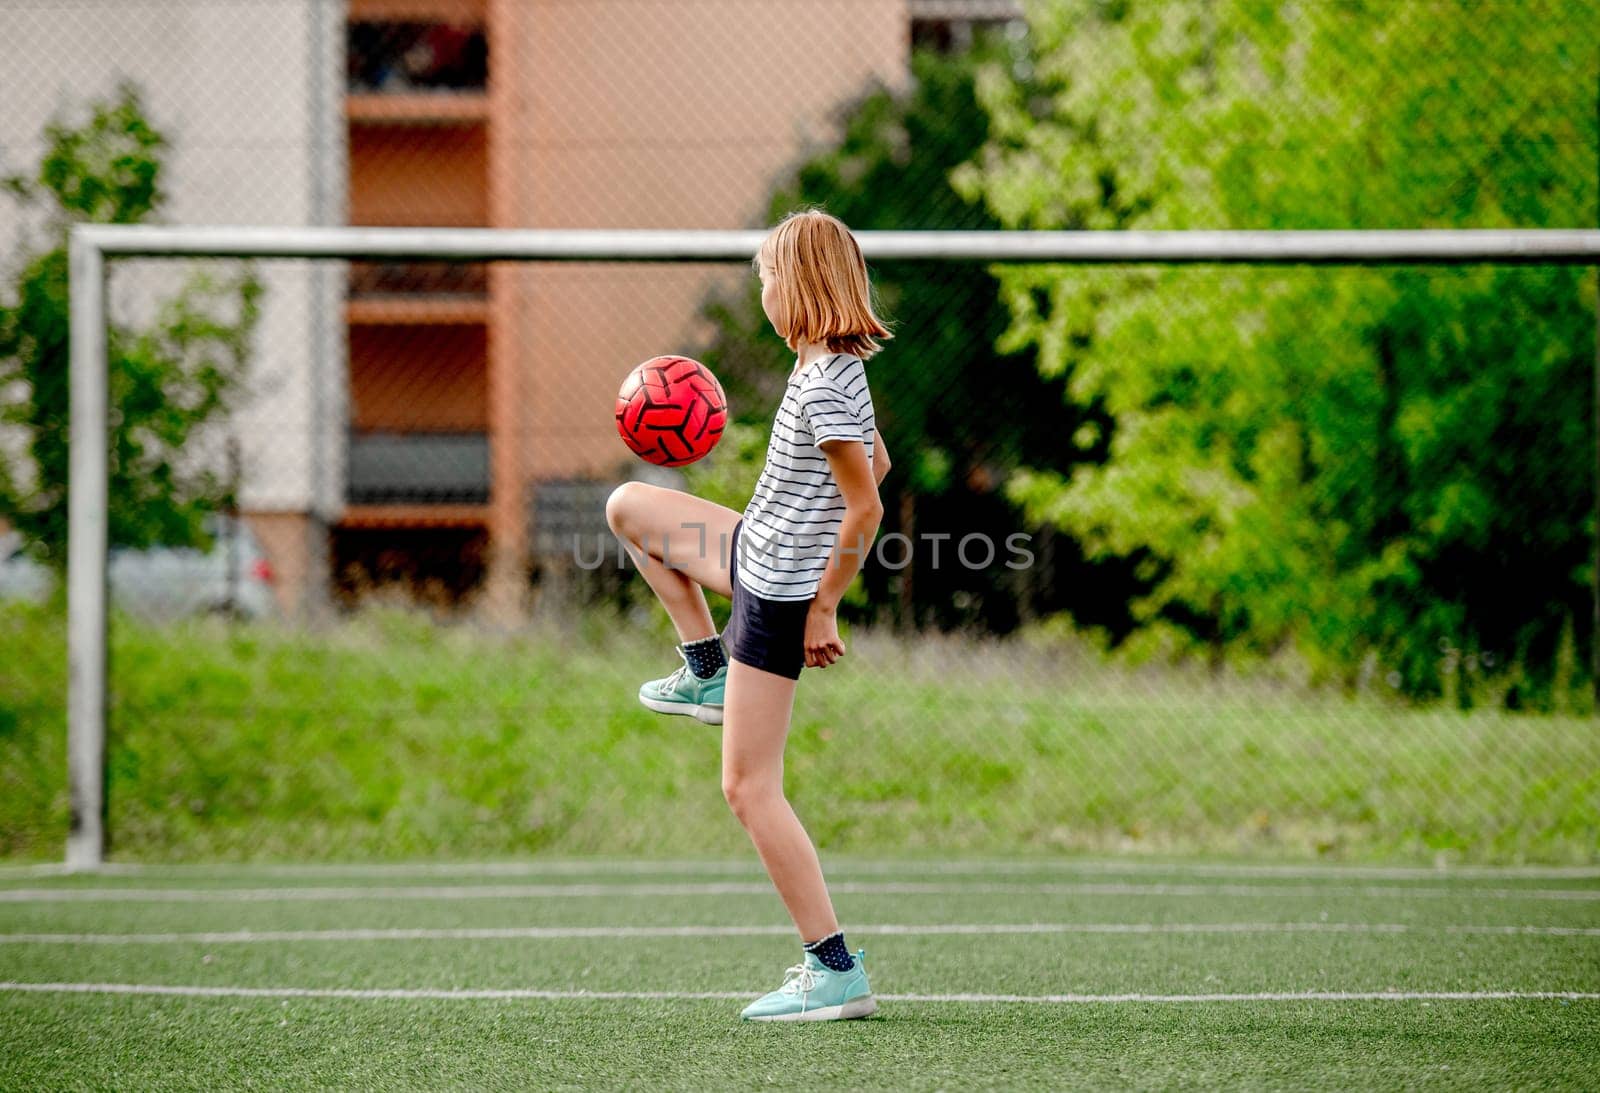 Pretty child girl kicking football ball at socket field. Cute female kid playing active game